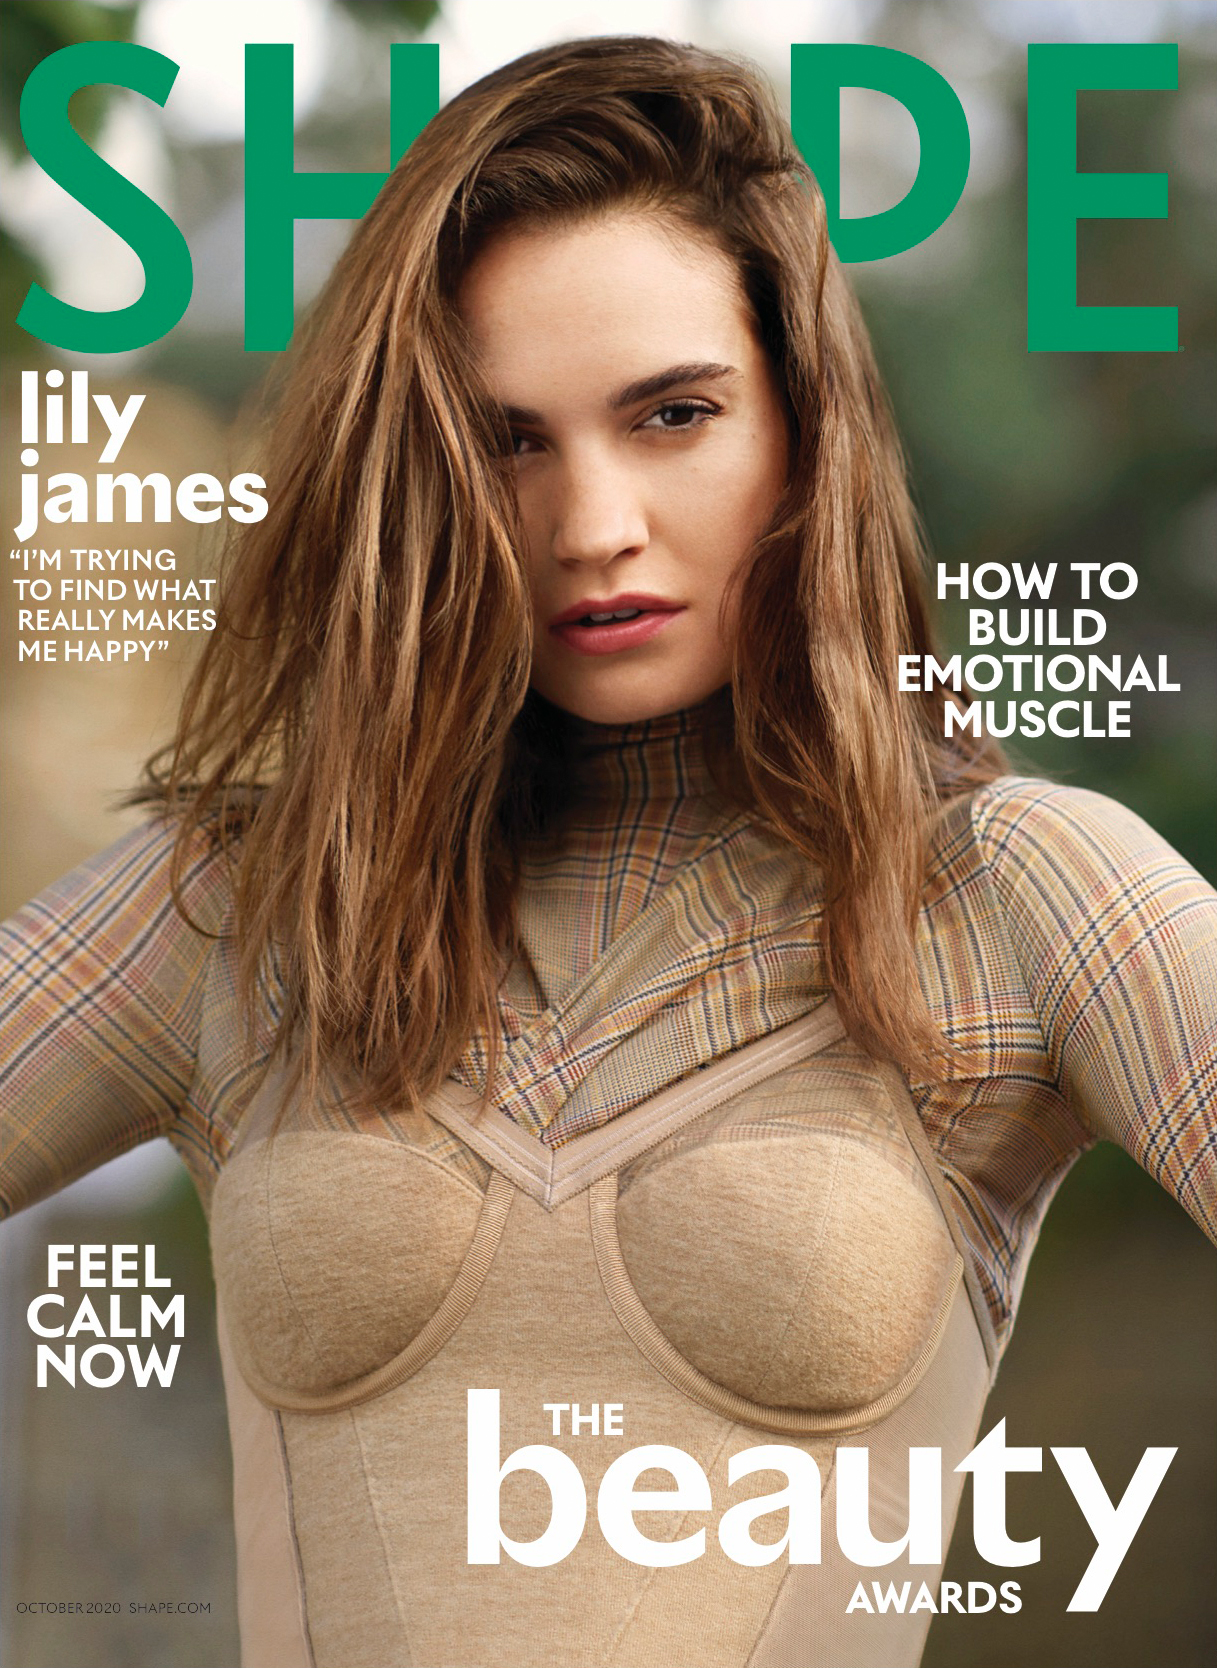 Lily James in Shape!